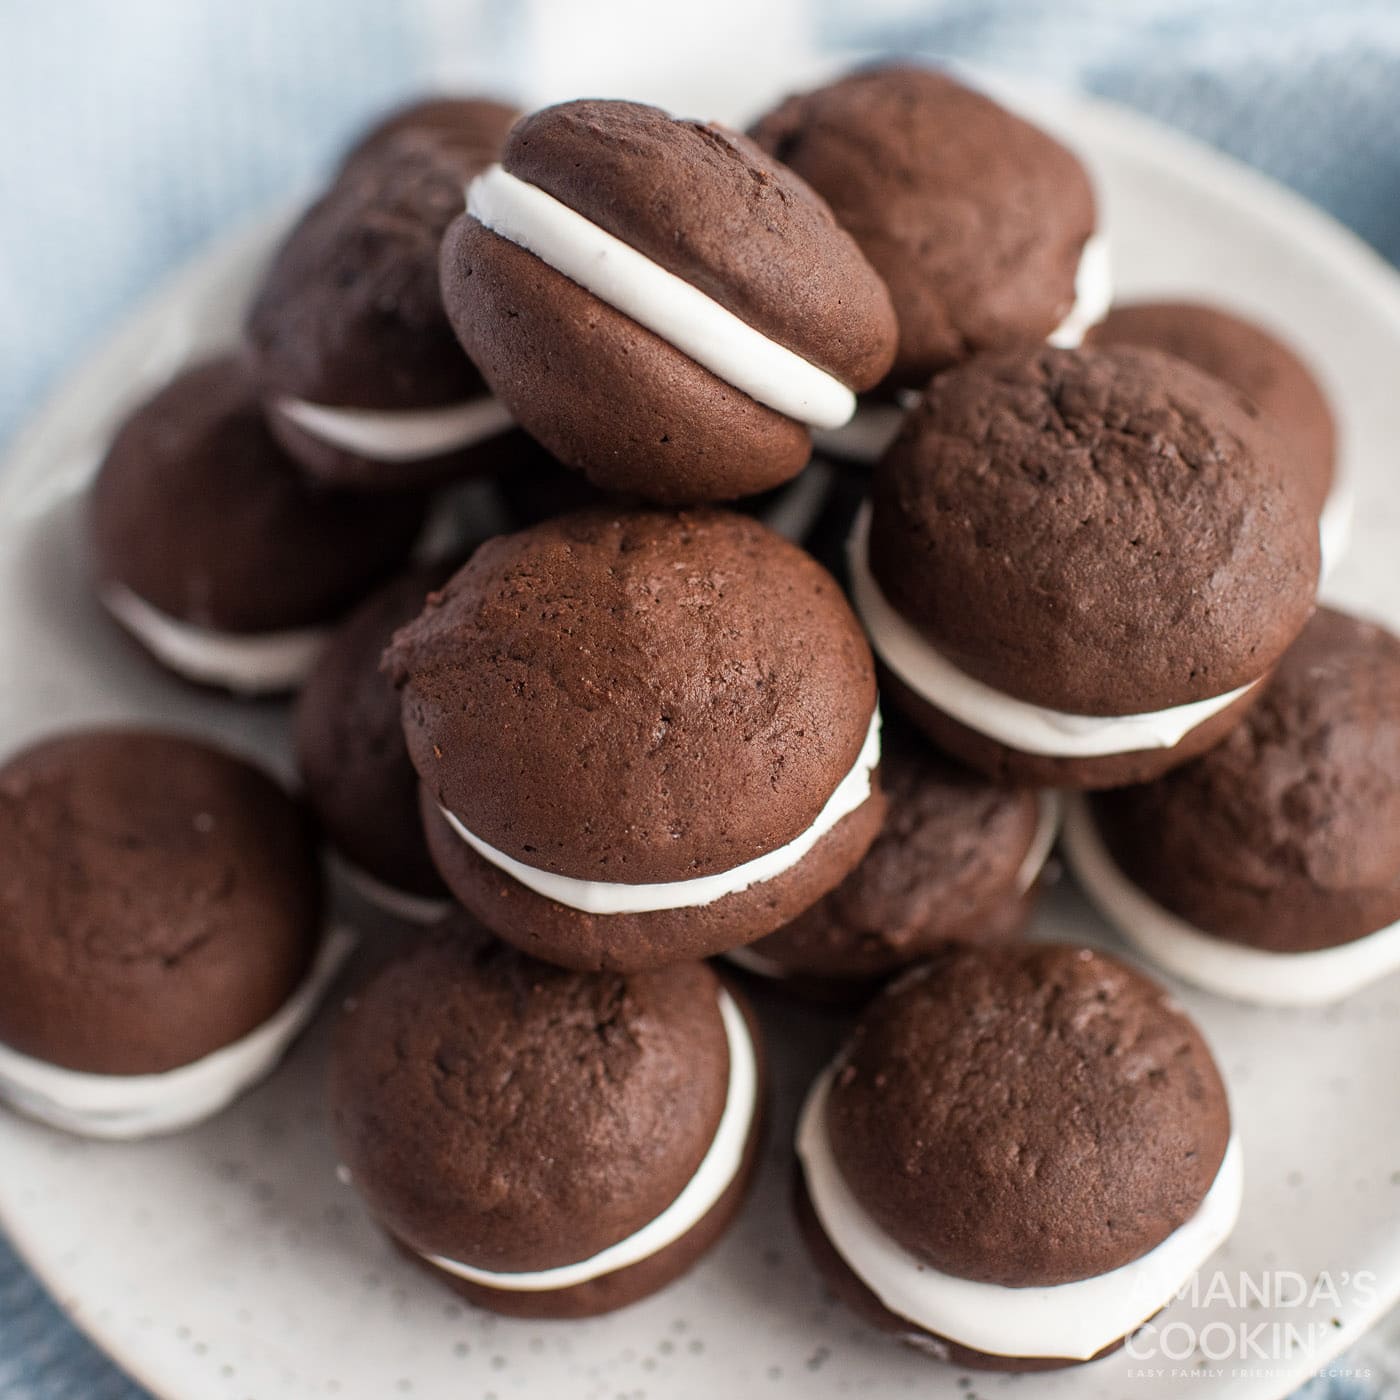 How to make Whoopie Pies at Home